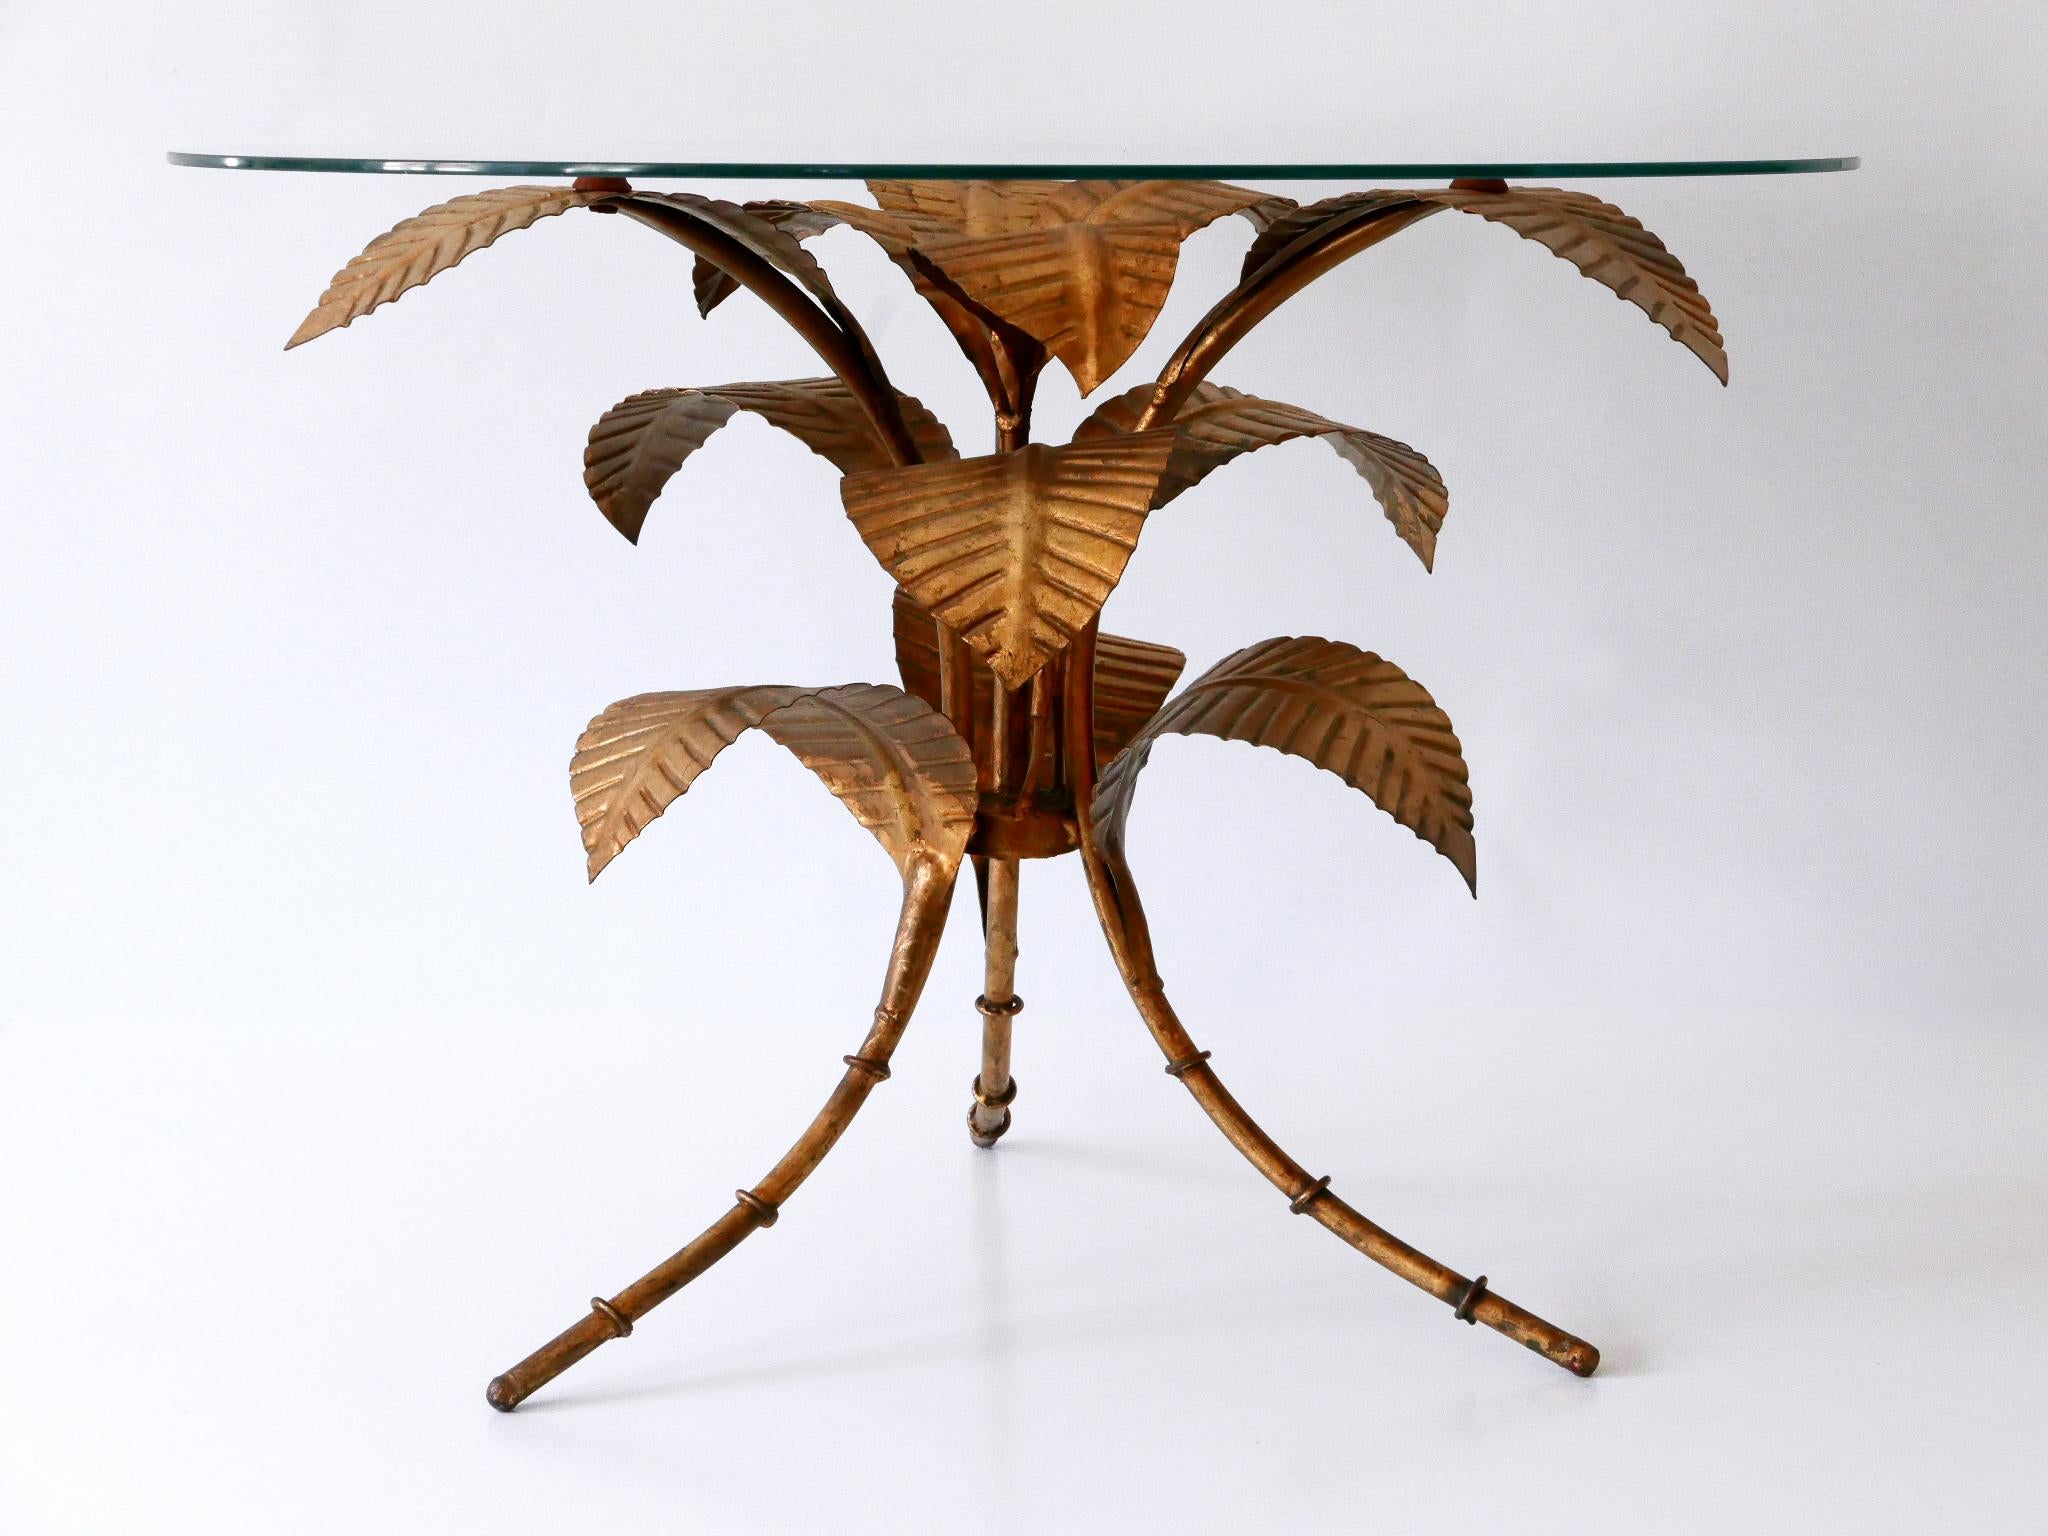 Highly decorative and rare coffee table with gilt metal palm leaves.
Designed and manufactured by Hans Kögl, Germany, 1970s.

PS: The coffee table will be sold without glass top. Otherwise it would be more expensive to ship it than to buy a new